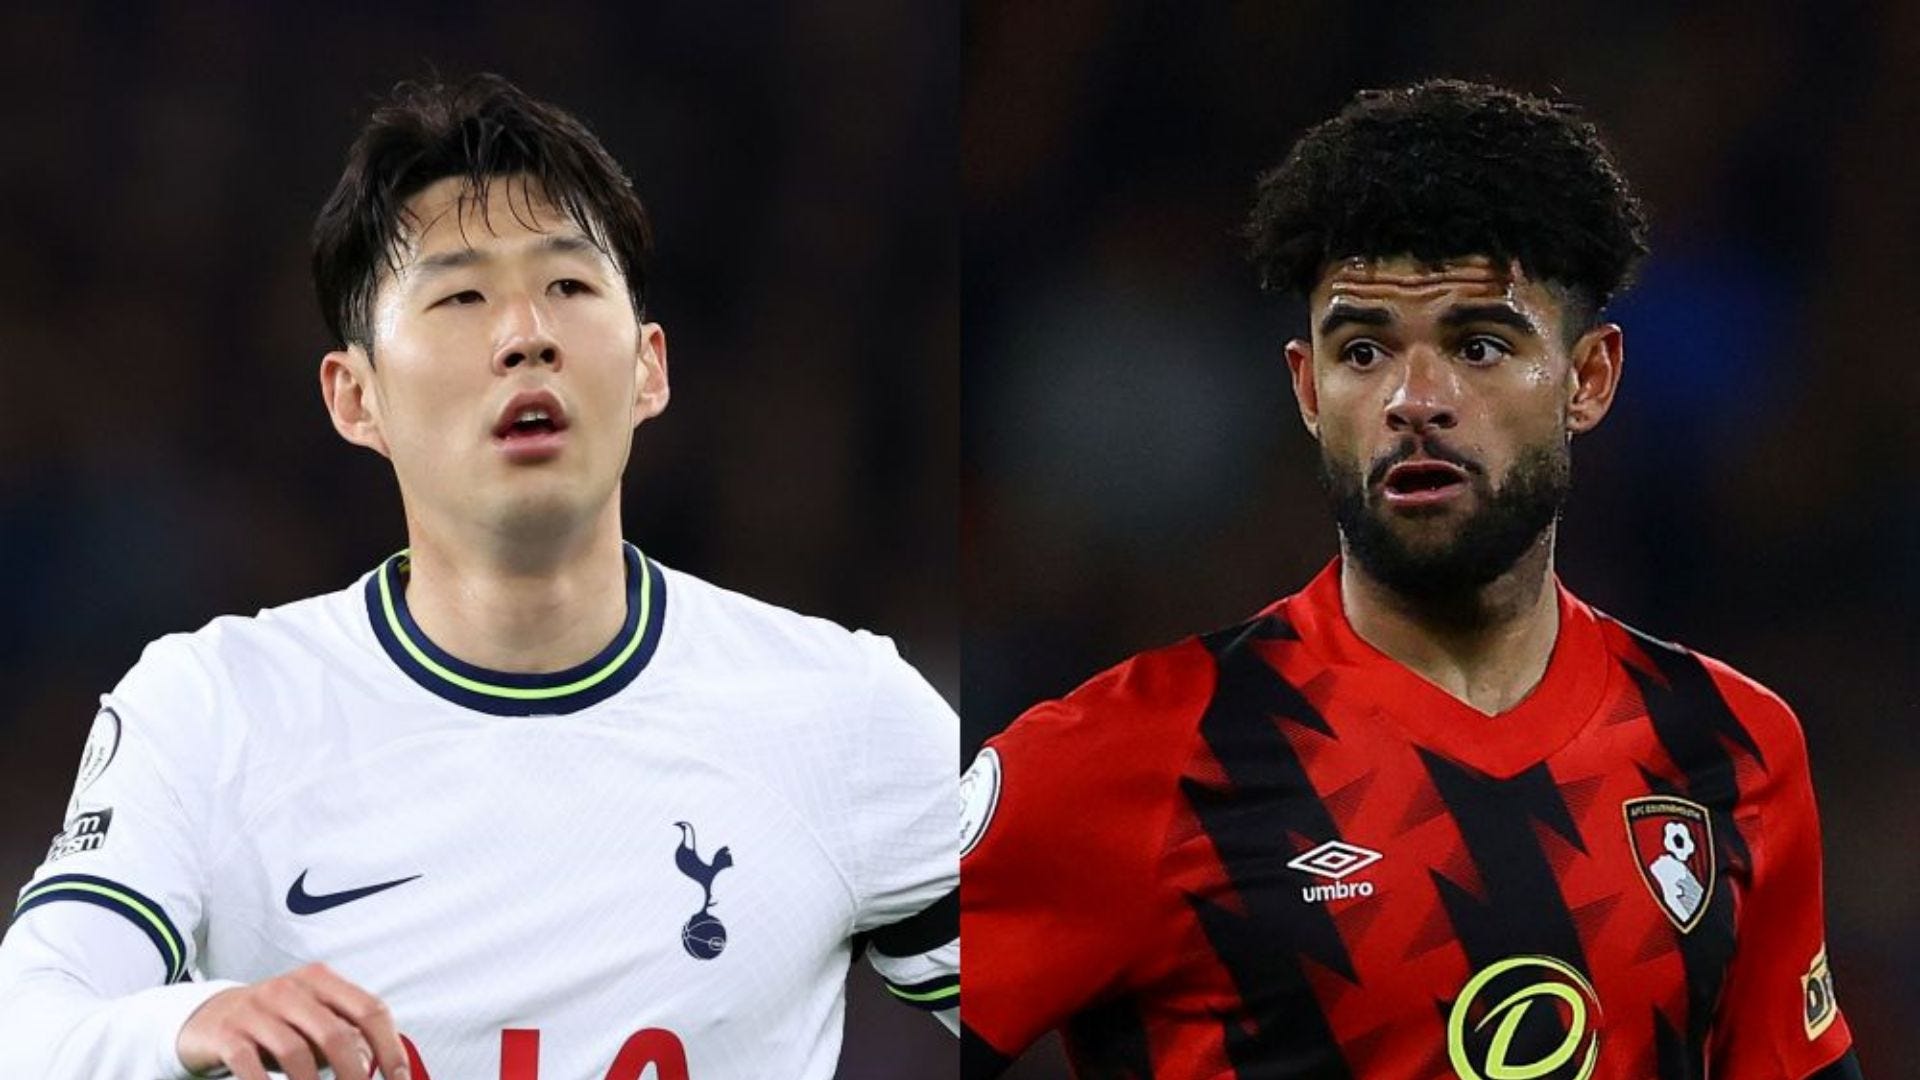 Tottenham vs Bournemouth Where to watch the match online, live stream, TV channels and kick-off time Goal US